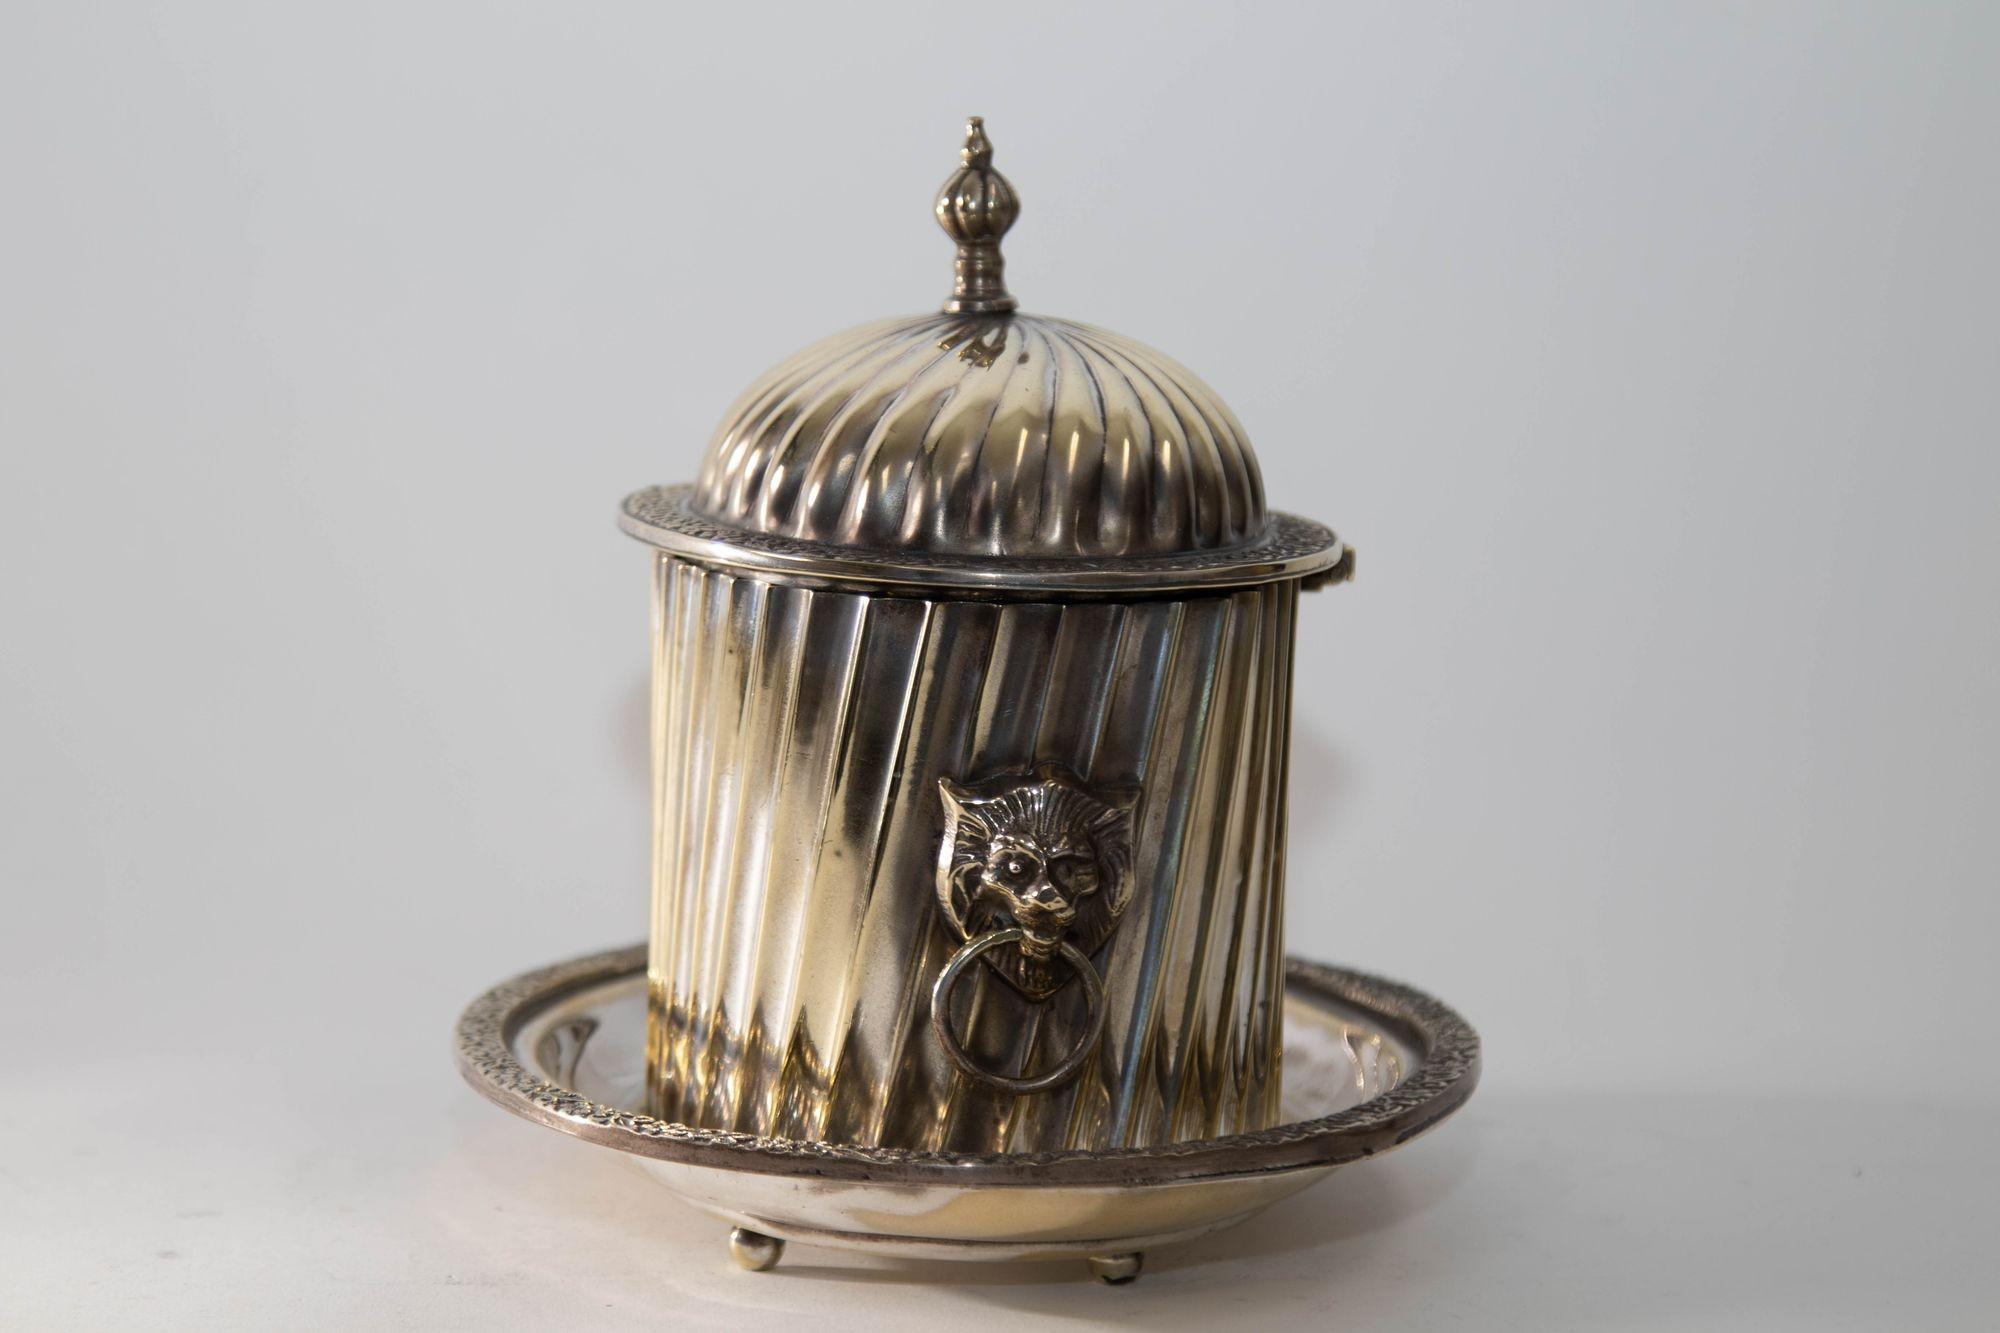 20th Century English Silver Plate Biscuit Box with Footed Plate and Lion Head Handles